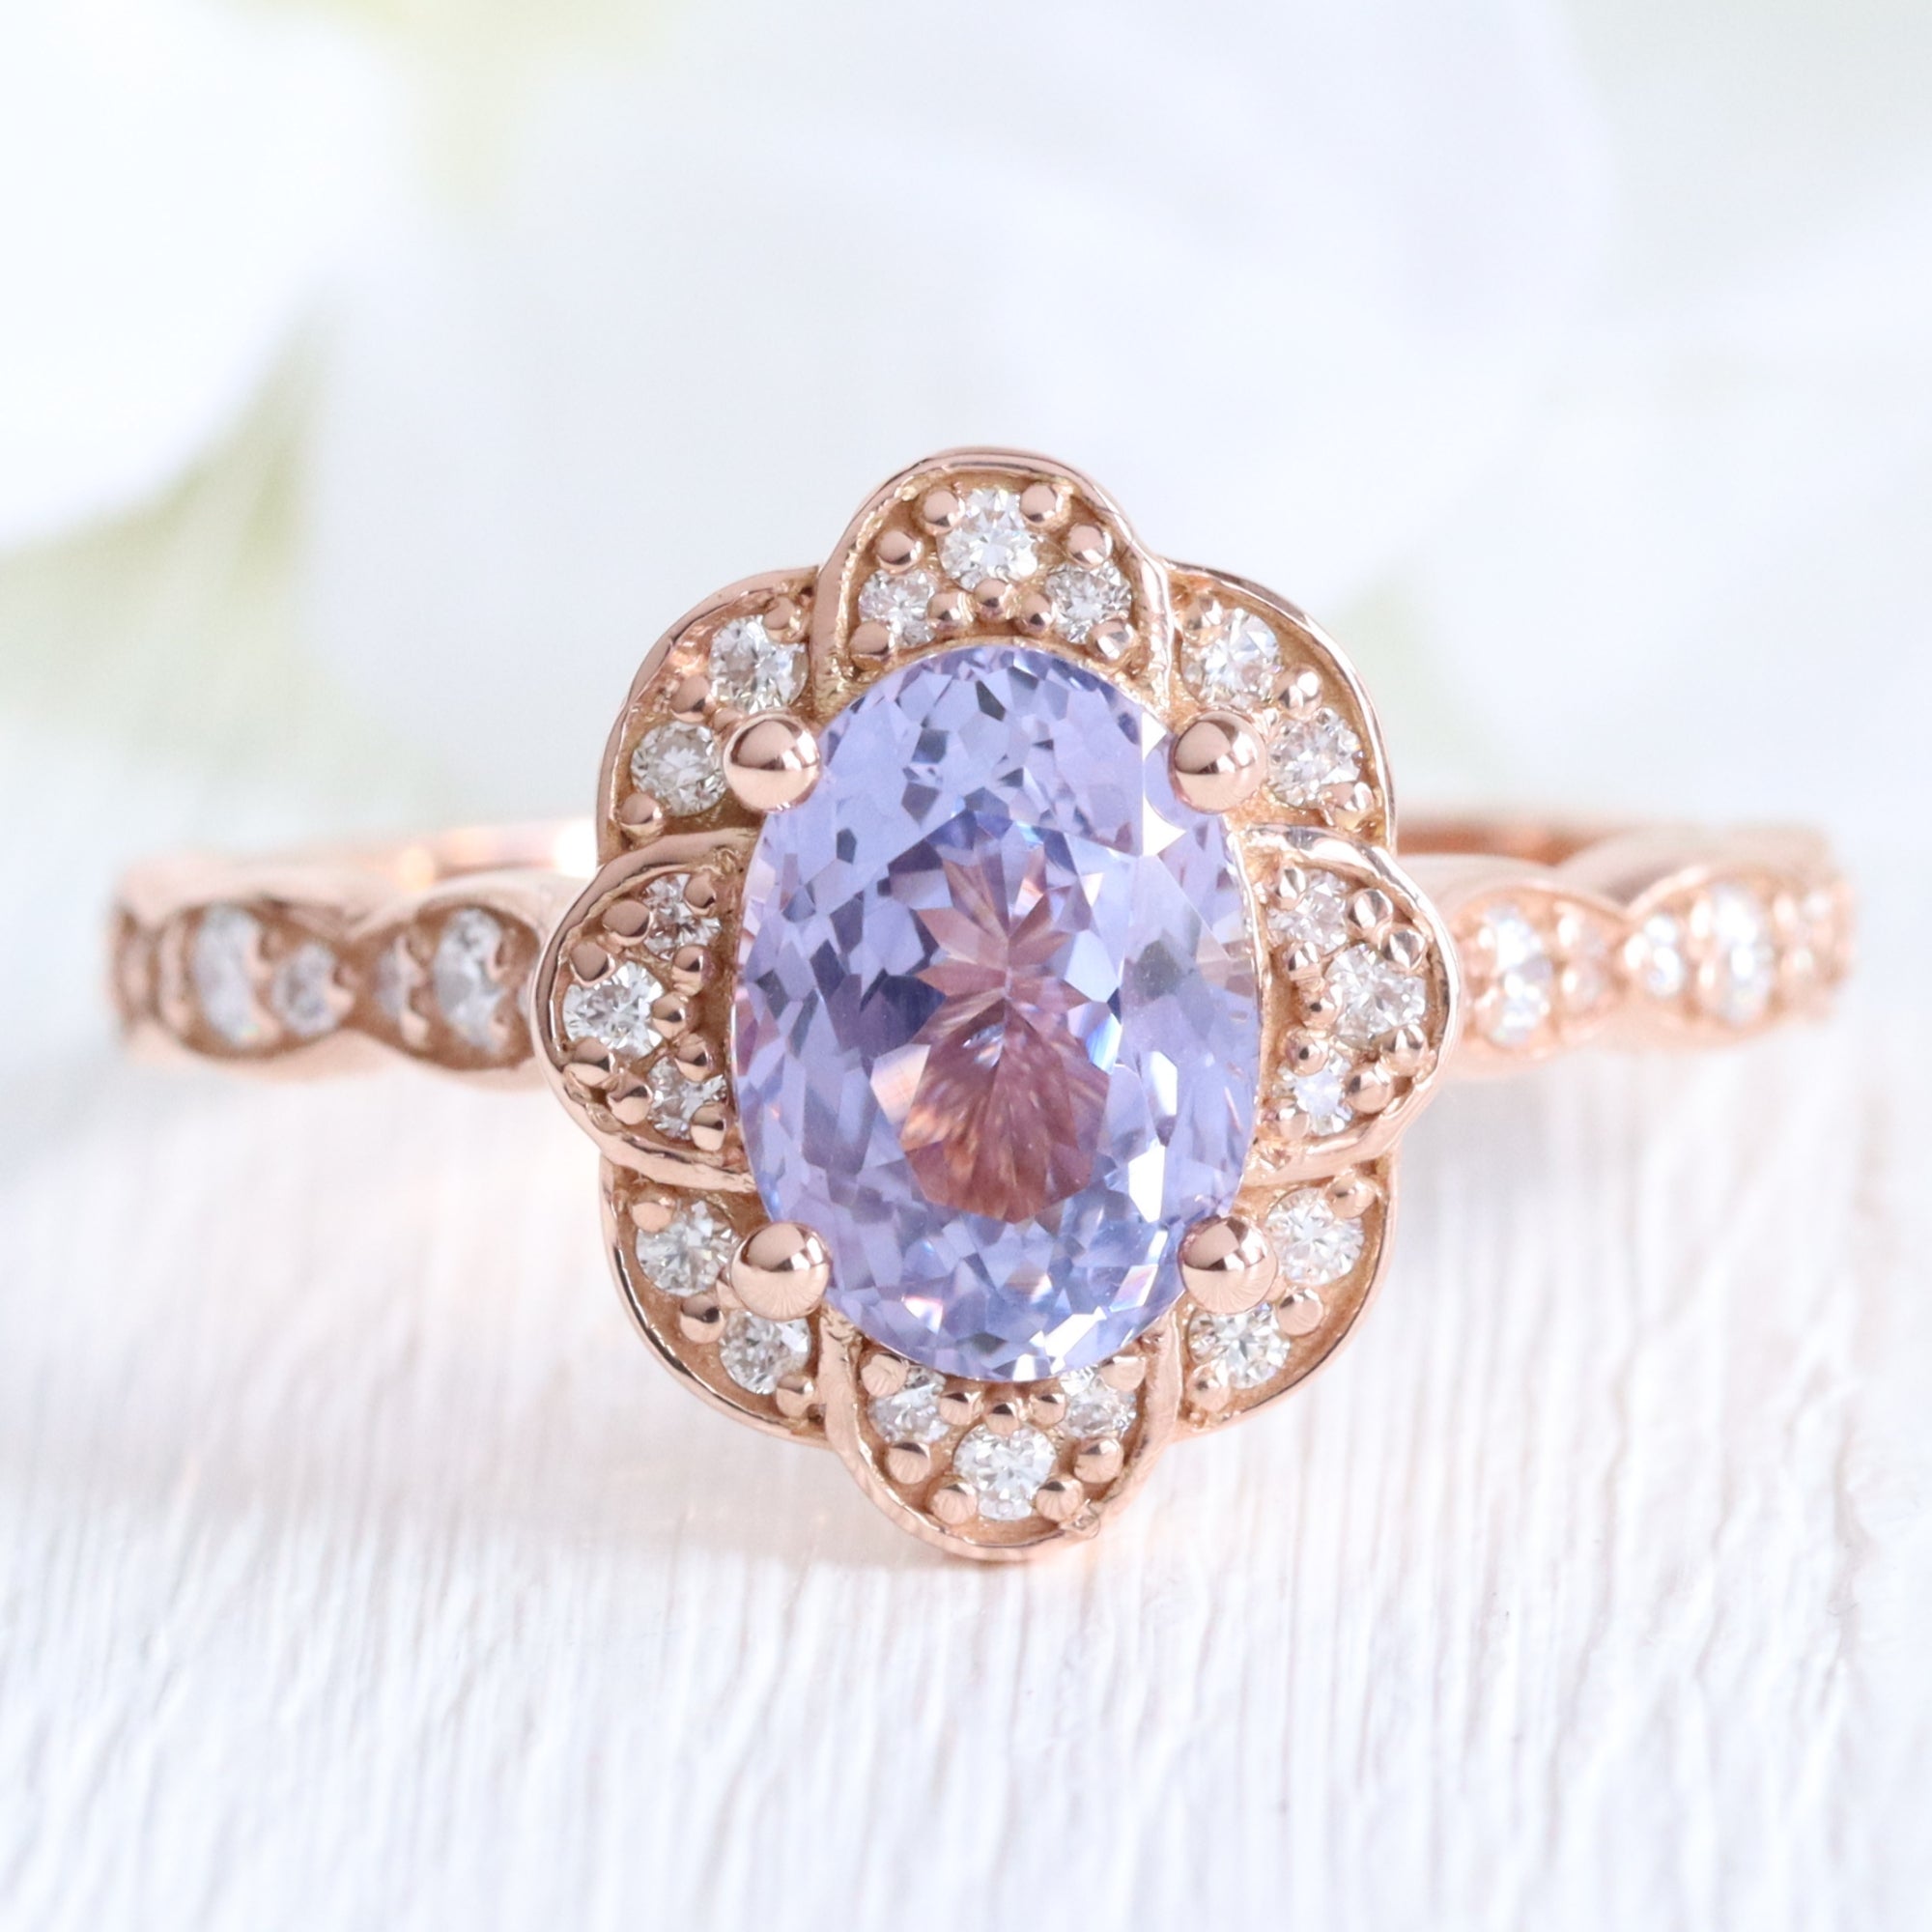 Oval lavender sapphire ring rose gold vintage style sapphire engagement ring la more design jewelry